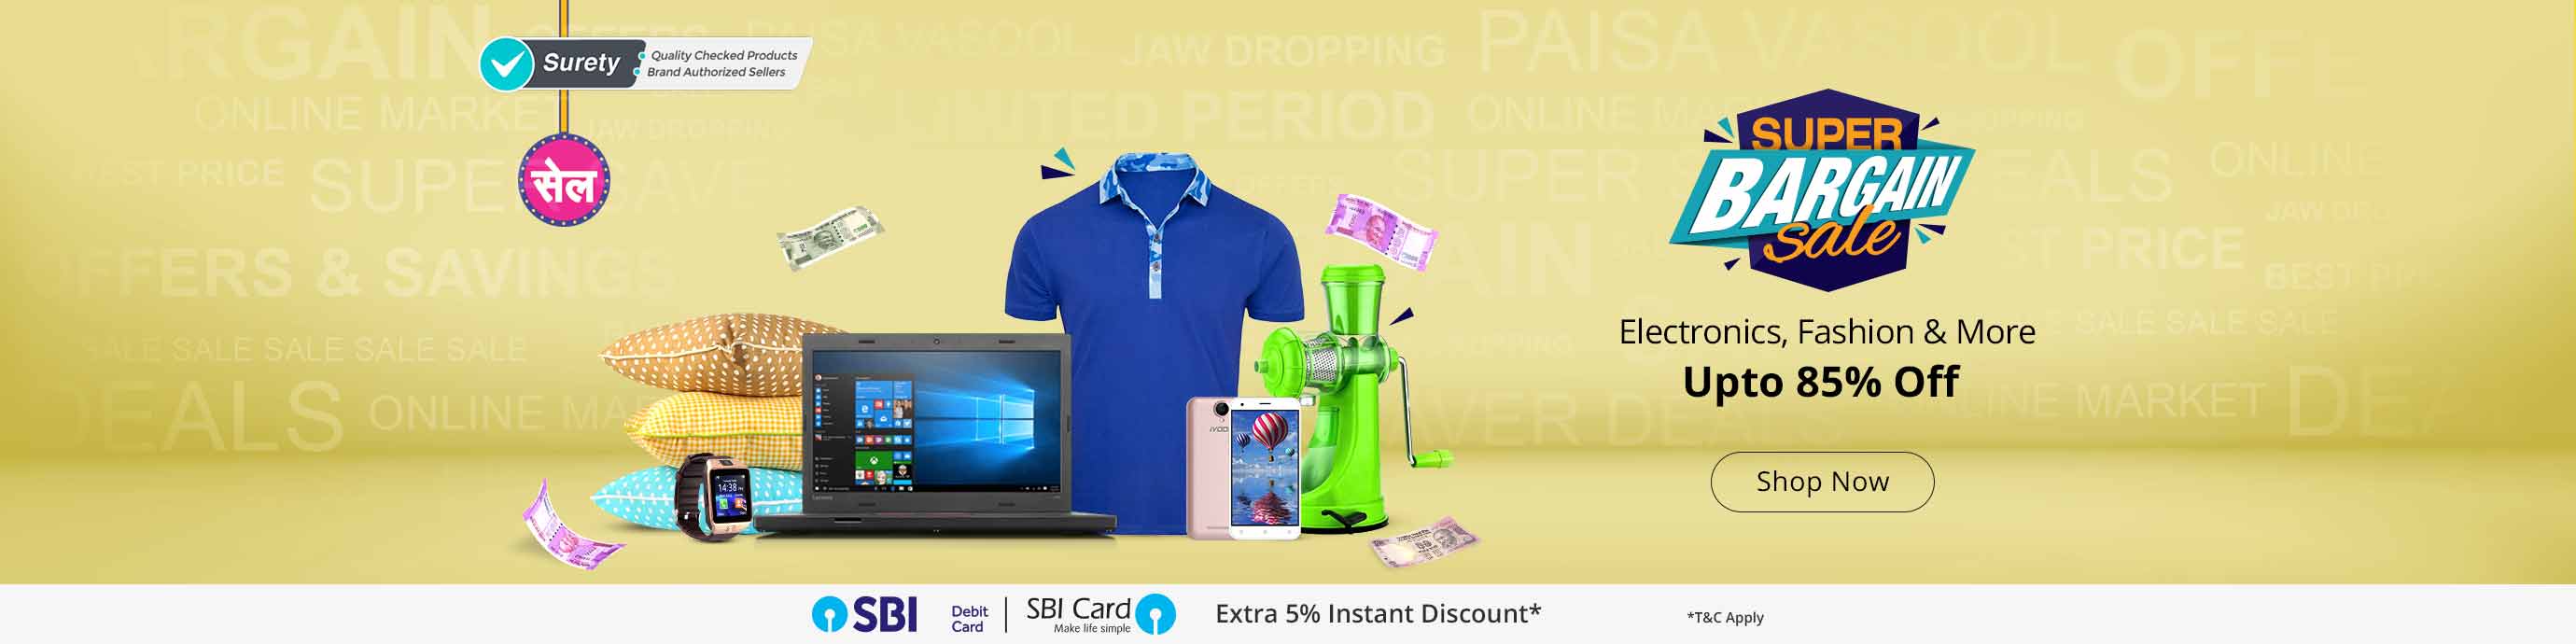 Super Bargain Sale Starting @ Just Rs.49/- at Shopclues